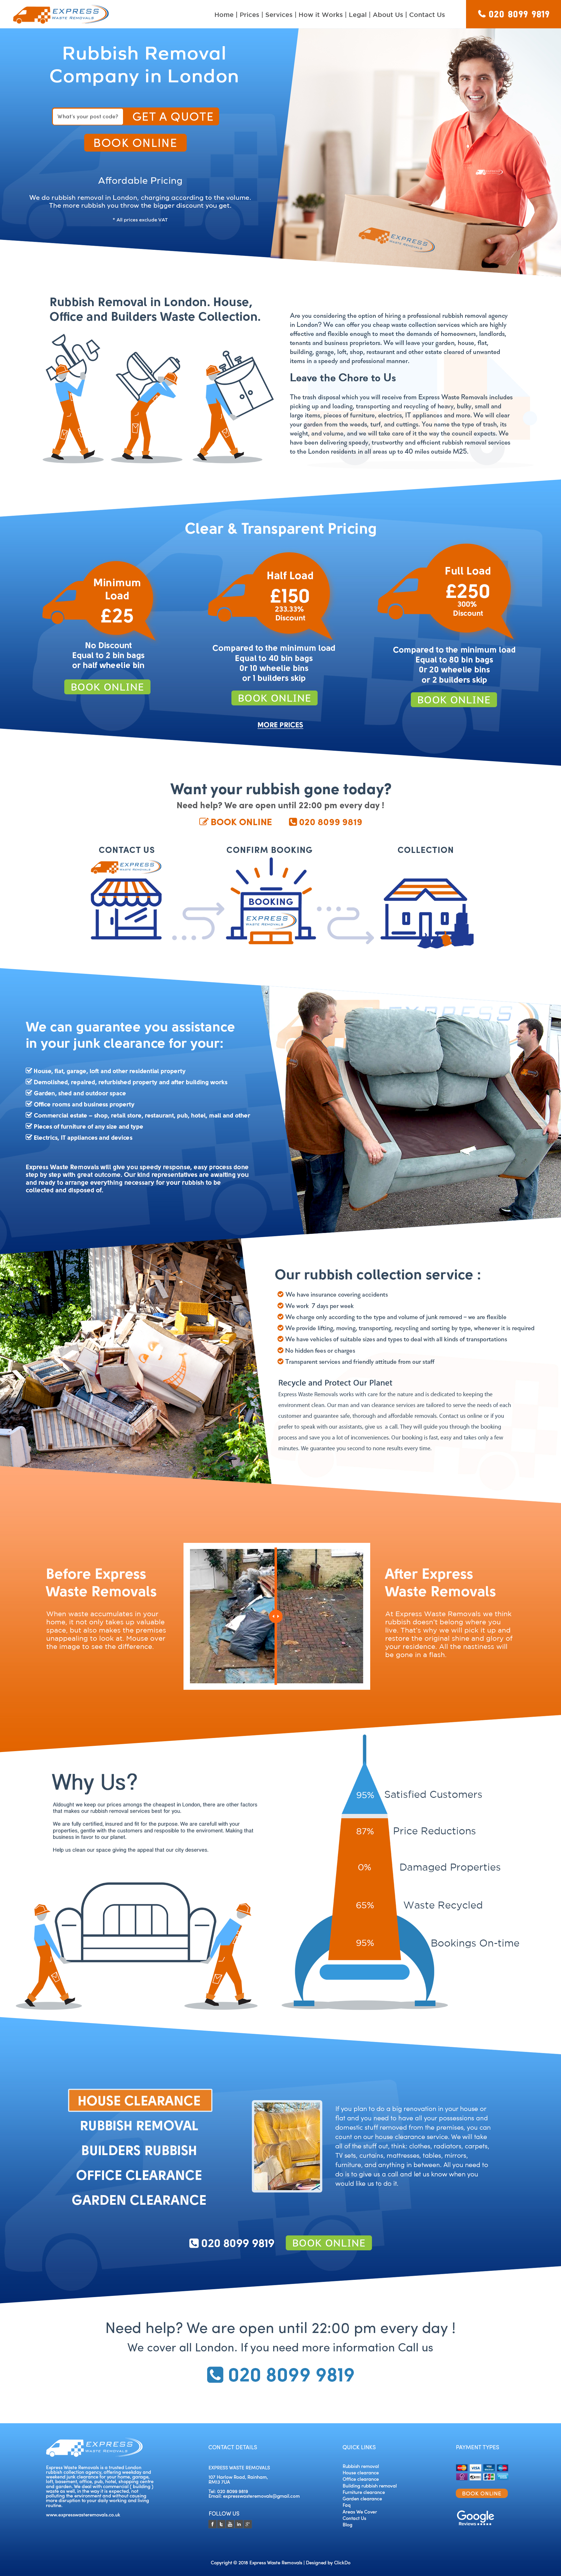 Express-Waste-Removals-Website-Home-Page